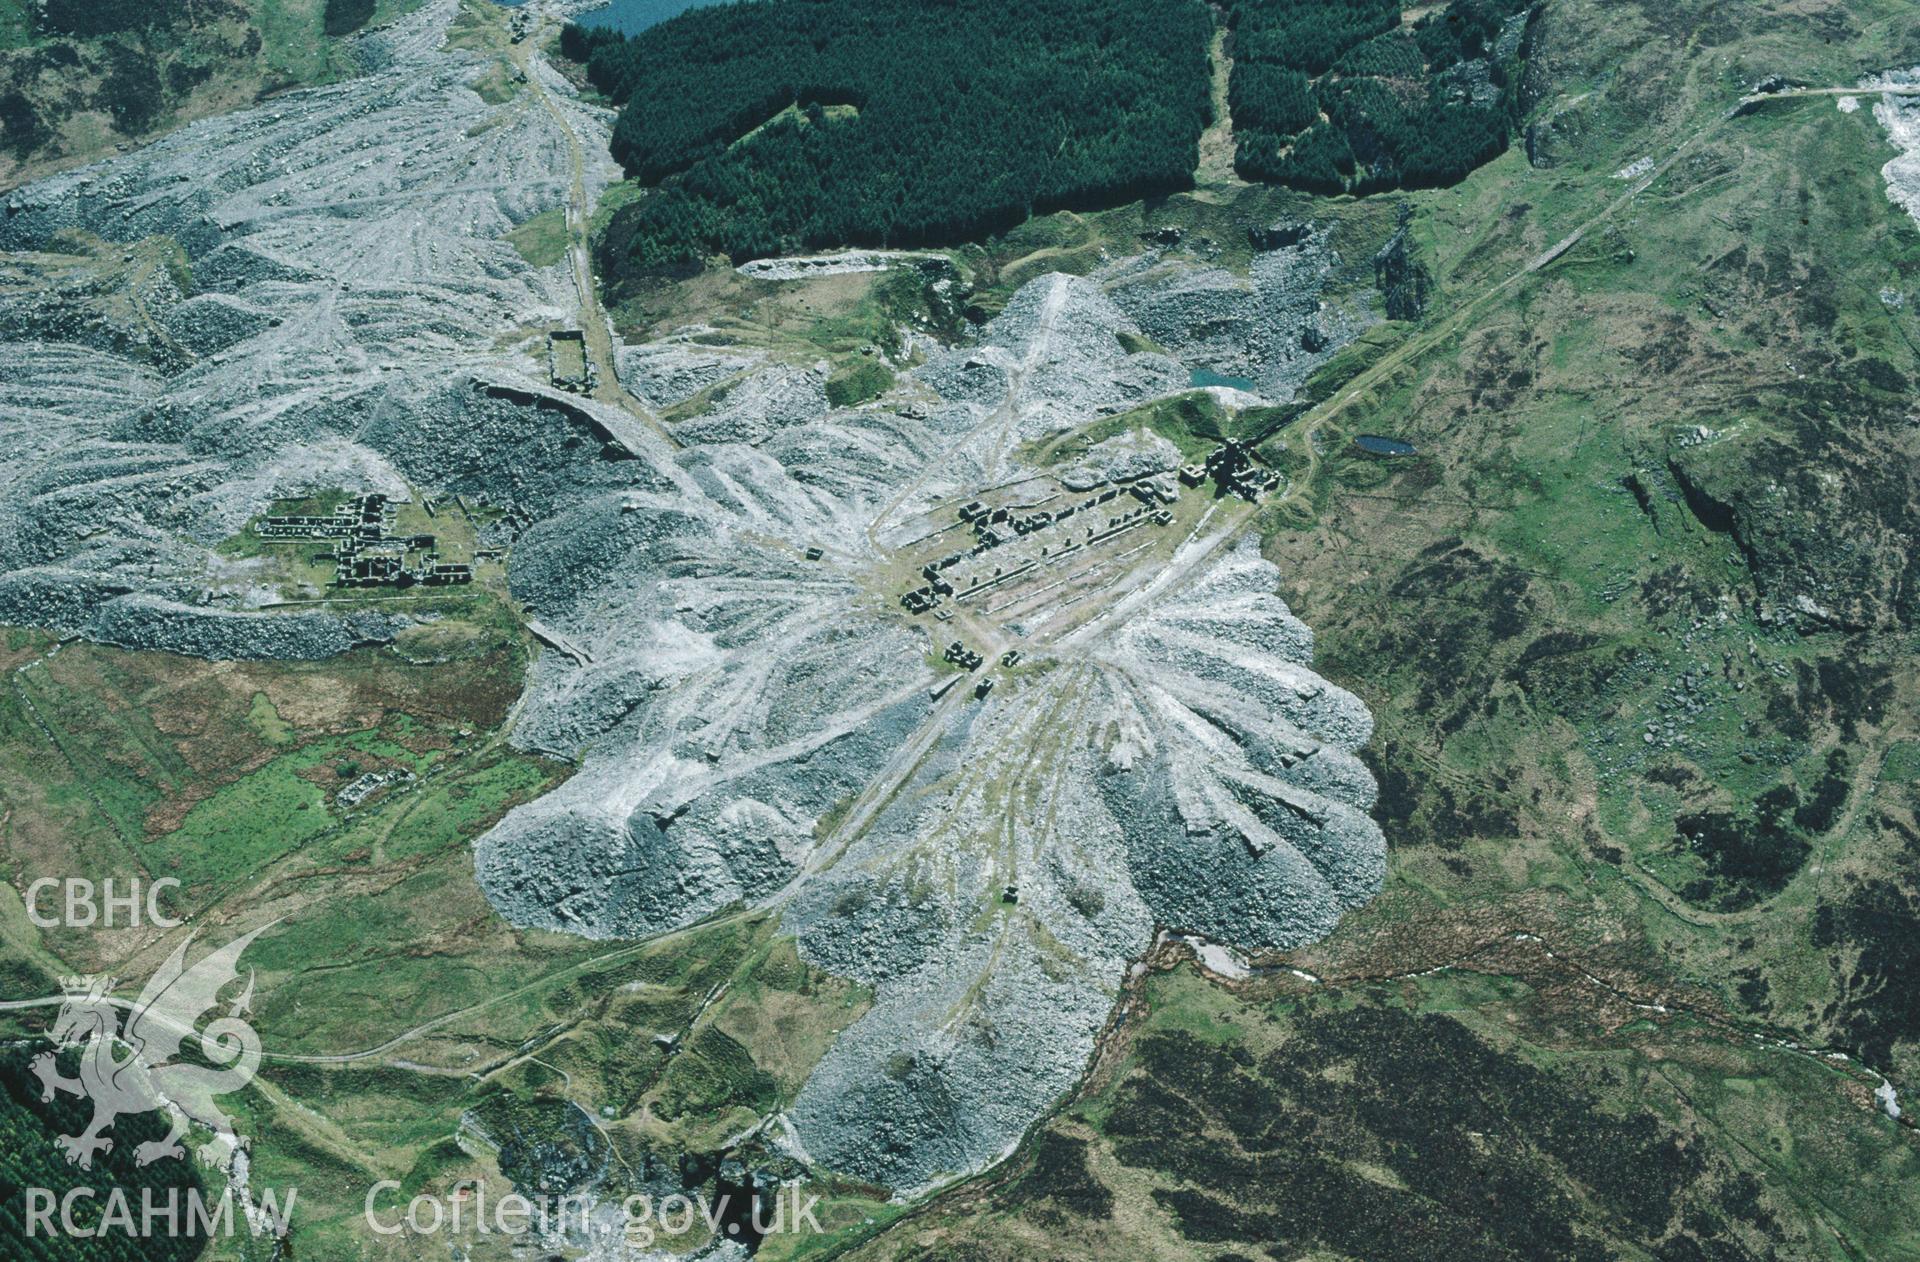 Slide of RCAHMW colour oblique aerial photograph of Rhiw-bach Slate Quarry, taken by C.R. Musson, 4/5/1999.